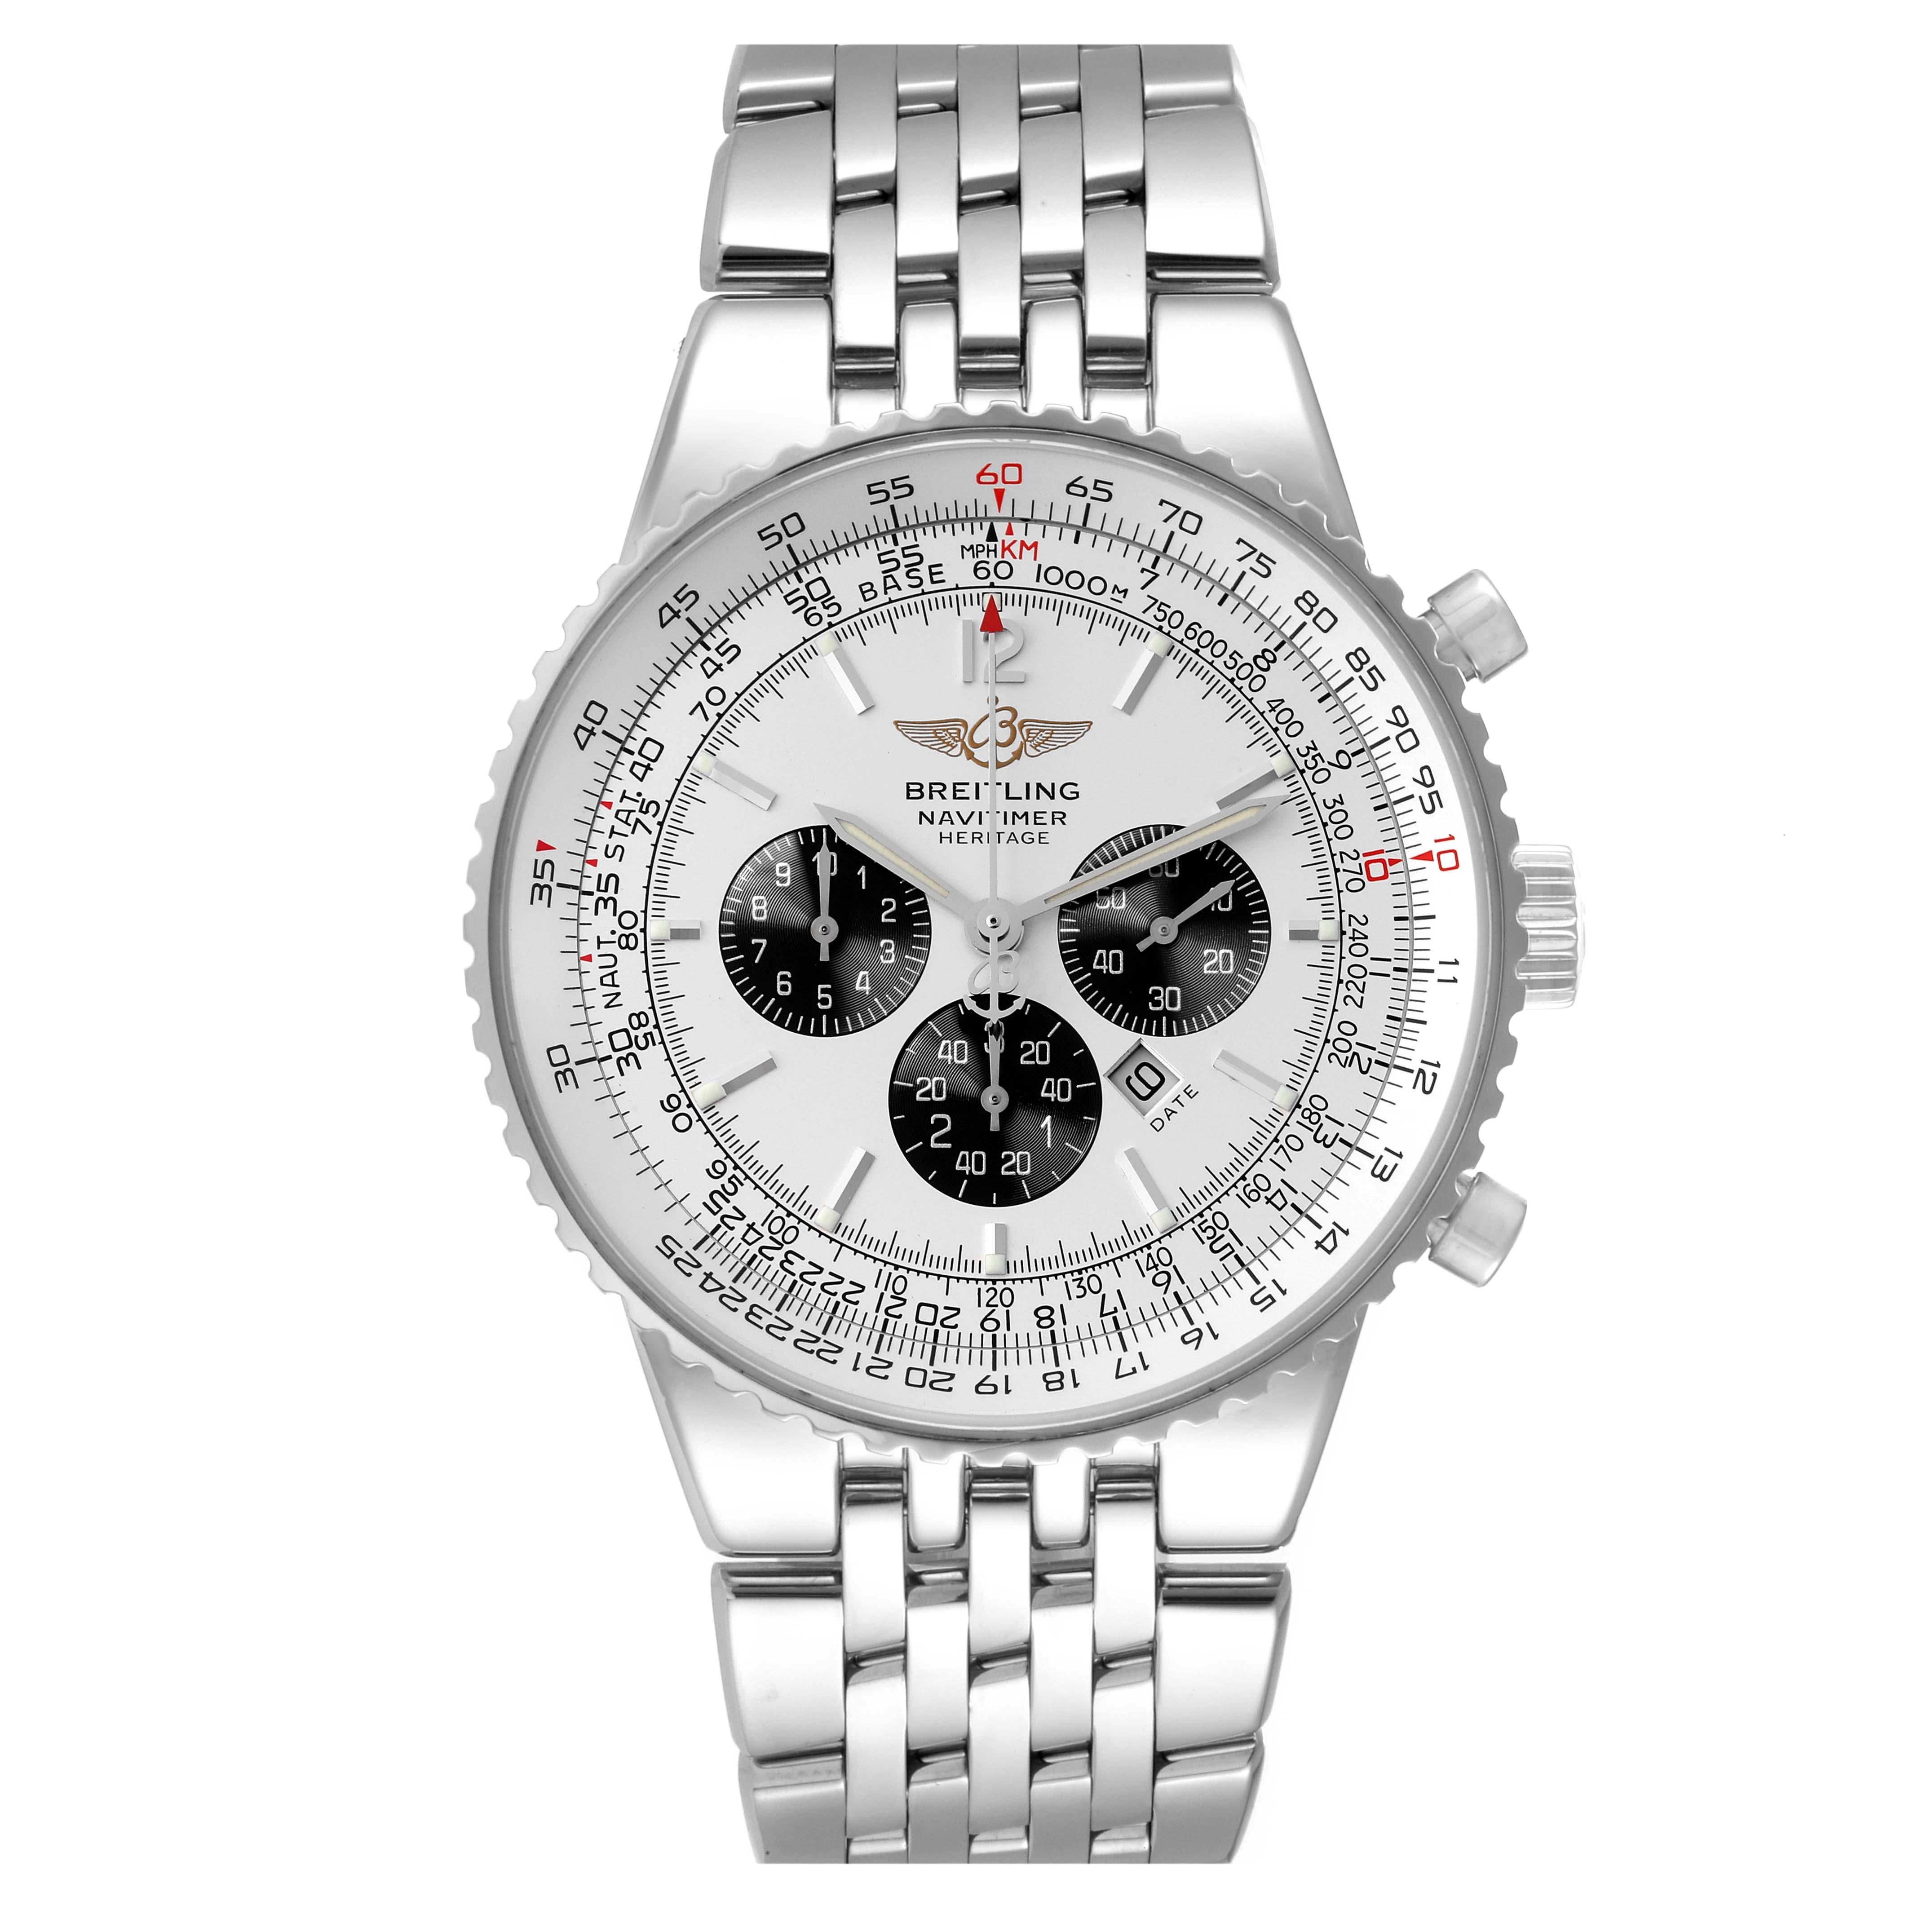 Breitling Navitimer Heritage Silver Dial Steel Mens Watch A35340 Box Papers. Automatic self-winding officially certified chronometer movement. Chronograph function. Stainless steel case 43 mm in diameter. Stainless steel screwed-down crown and